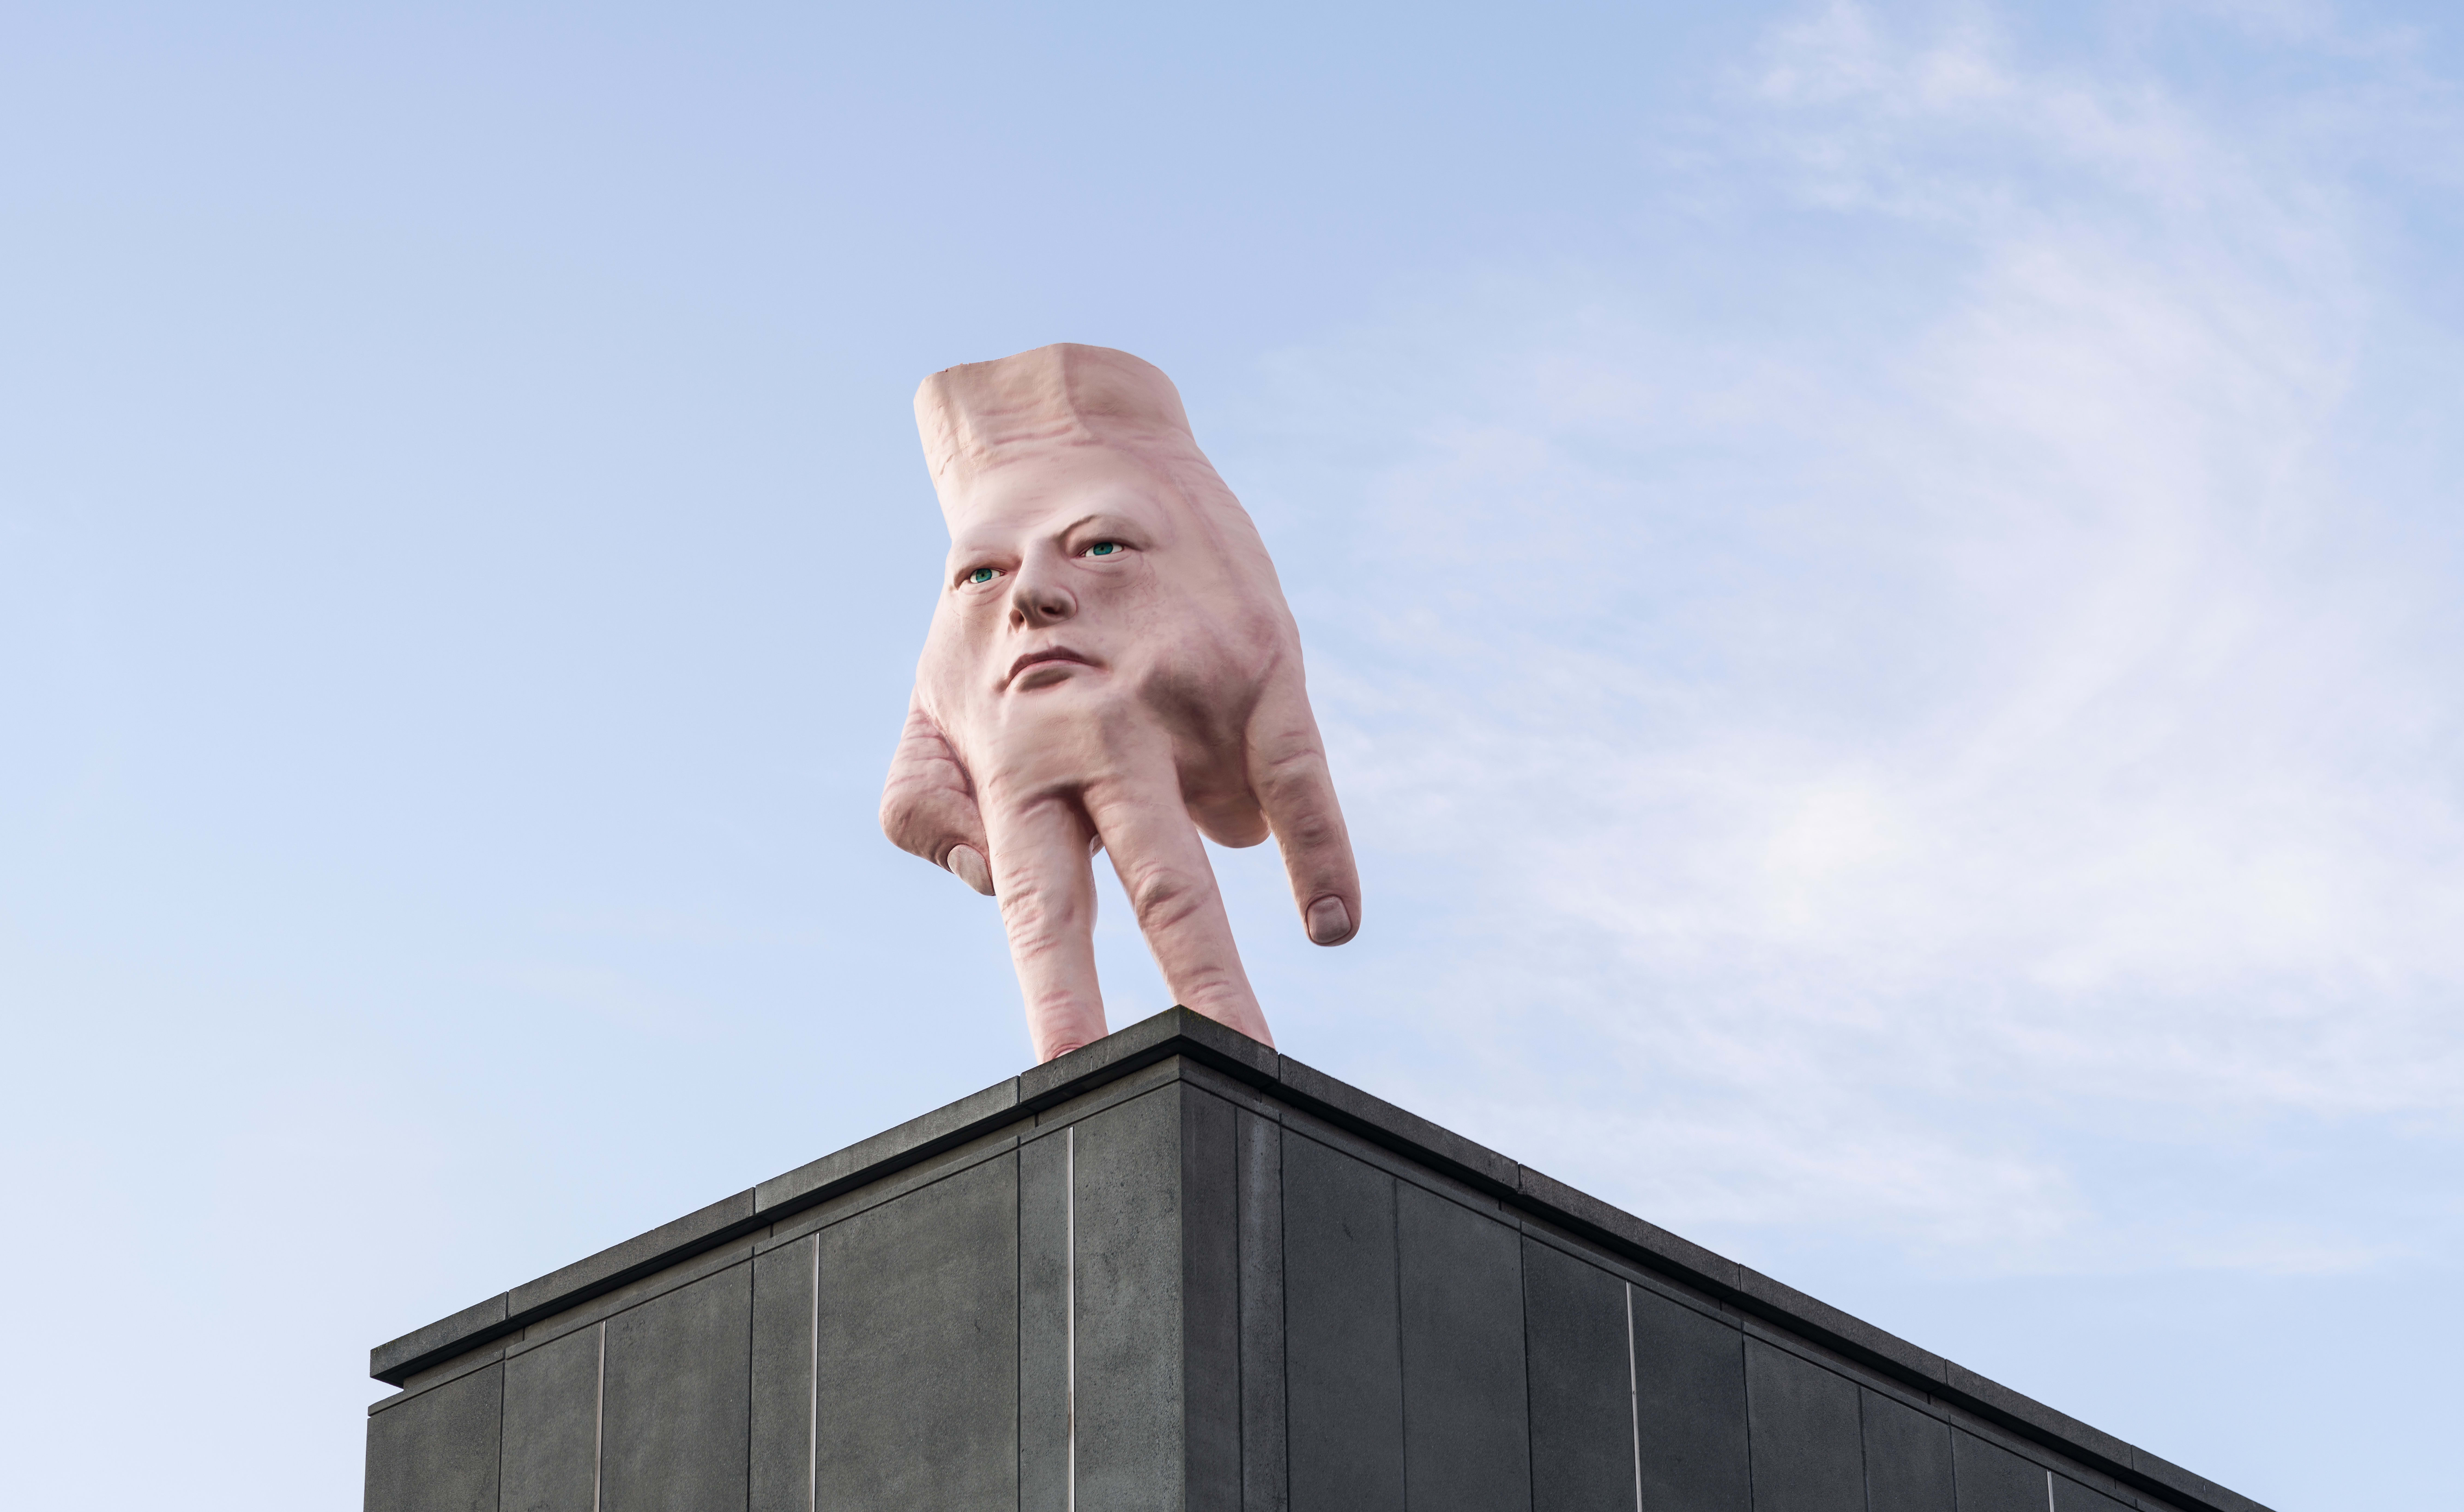 Ronnie van Hout's sculpture Quasi is five-metres tall, made of steel, polystyrene and painted resin.